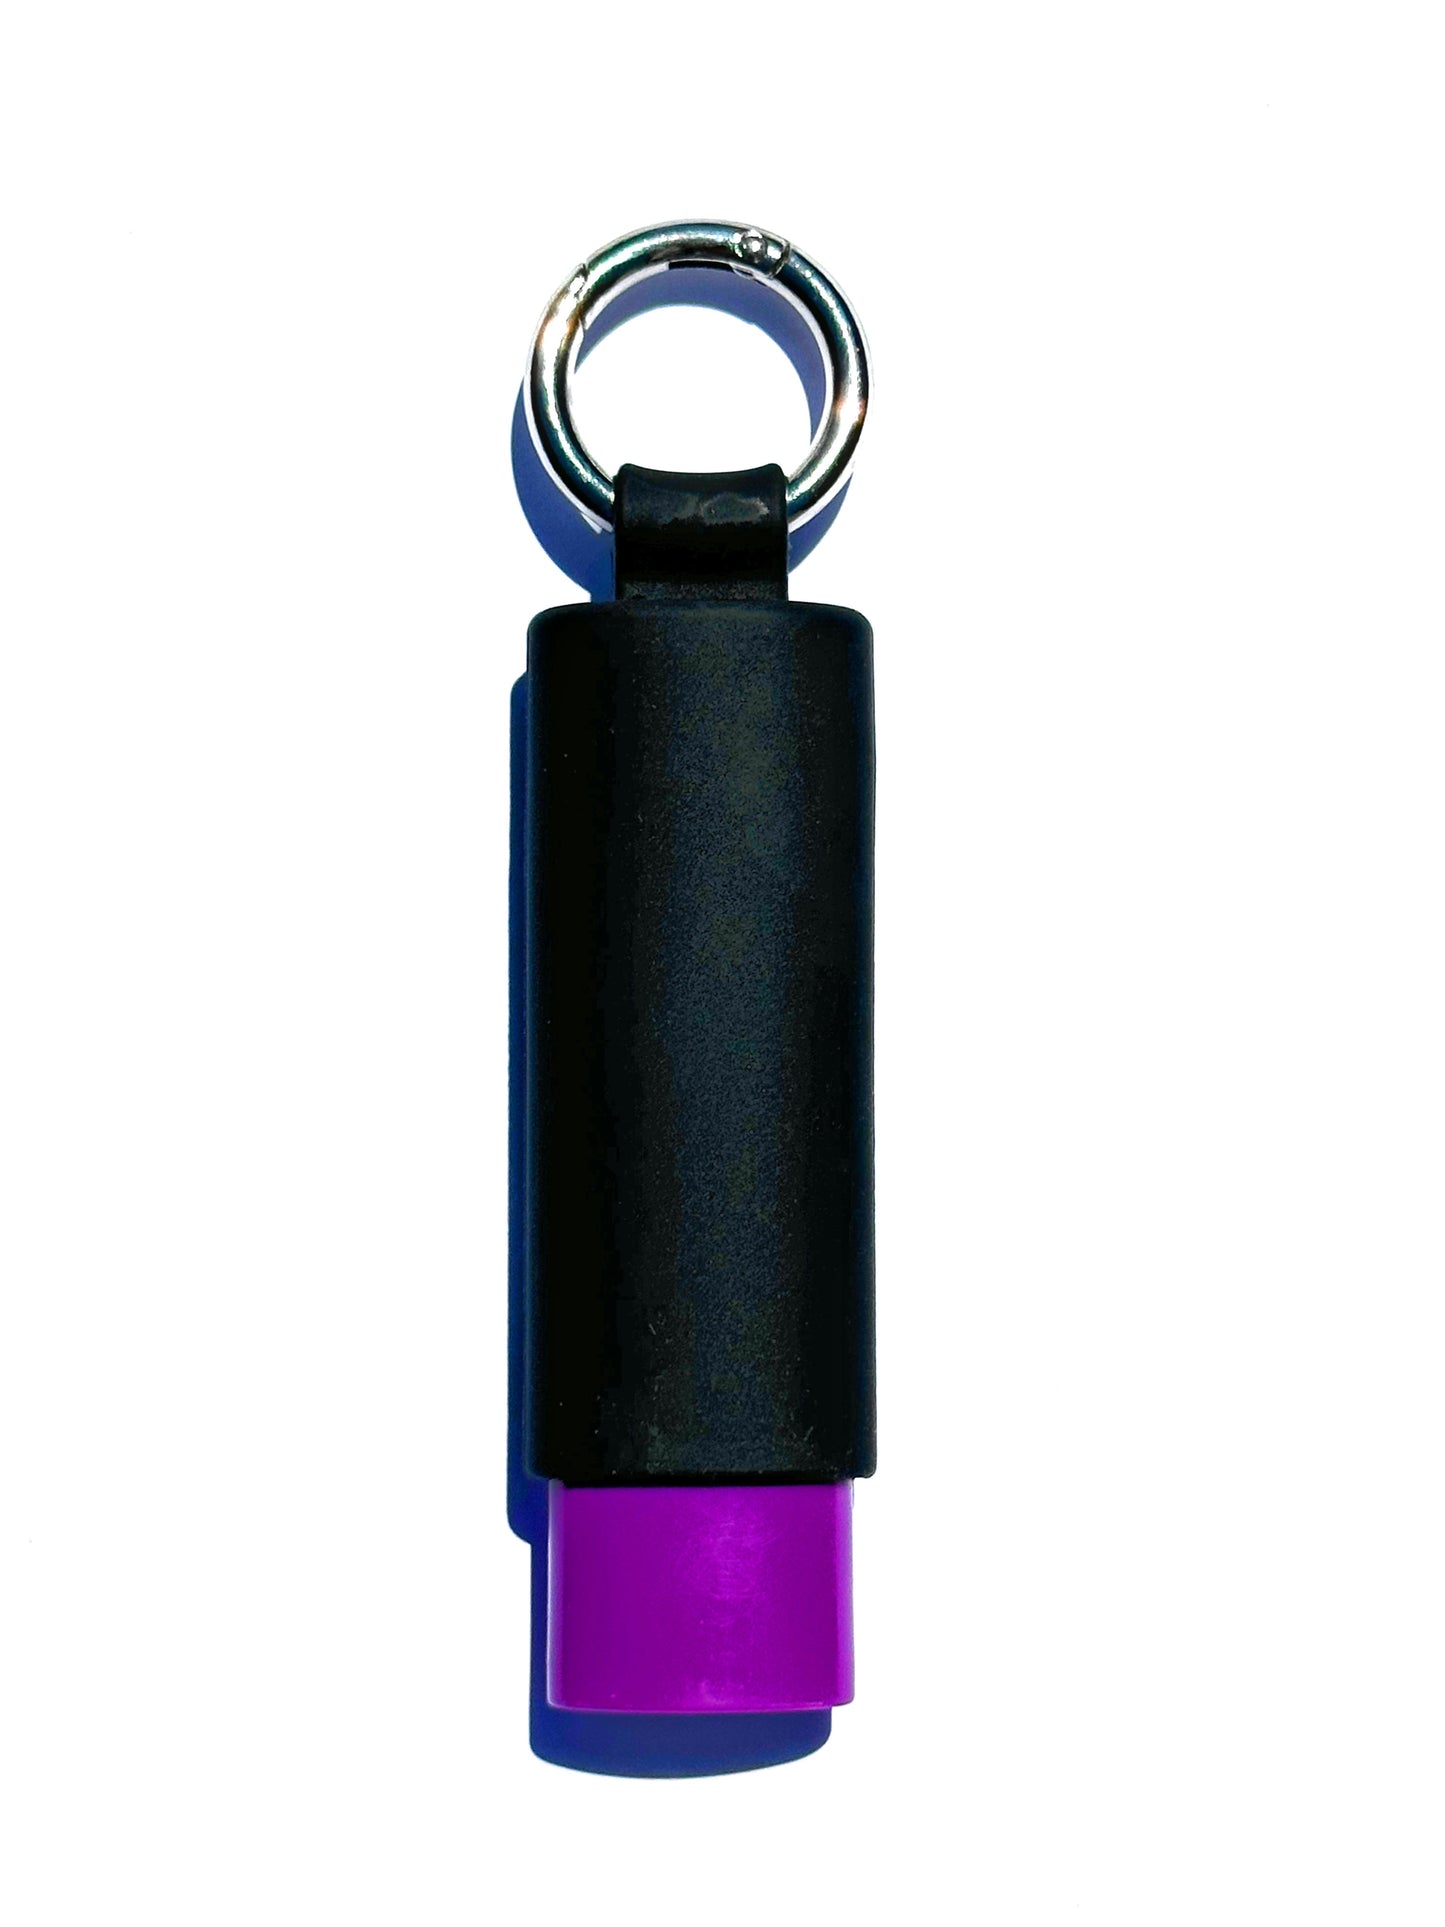 Black Lighter Holder Keychain with Spring Clip made by Lighter Locators